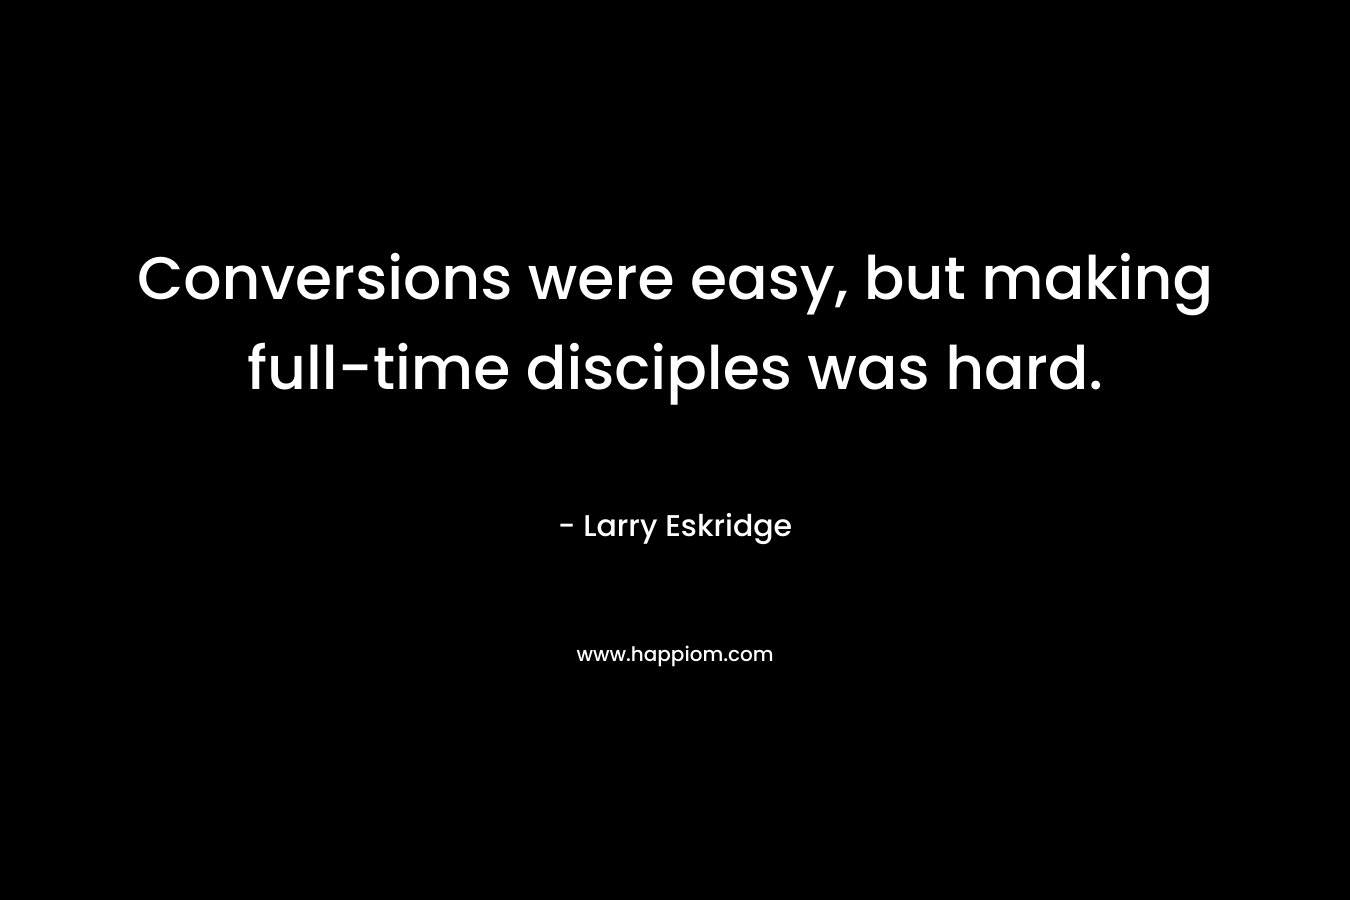 Conversions were easy, but making full-time disciples was hard. – Larry Eskridge